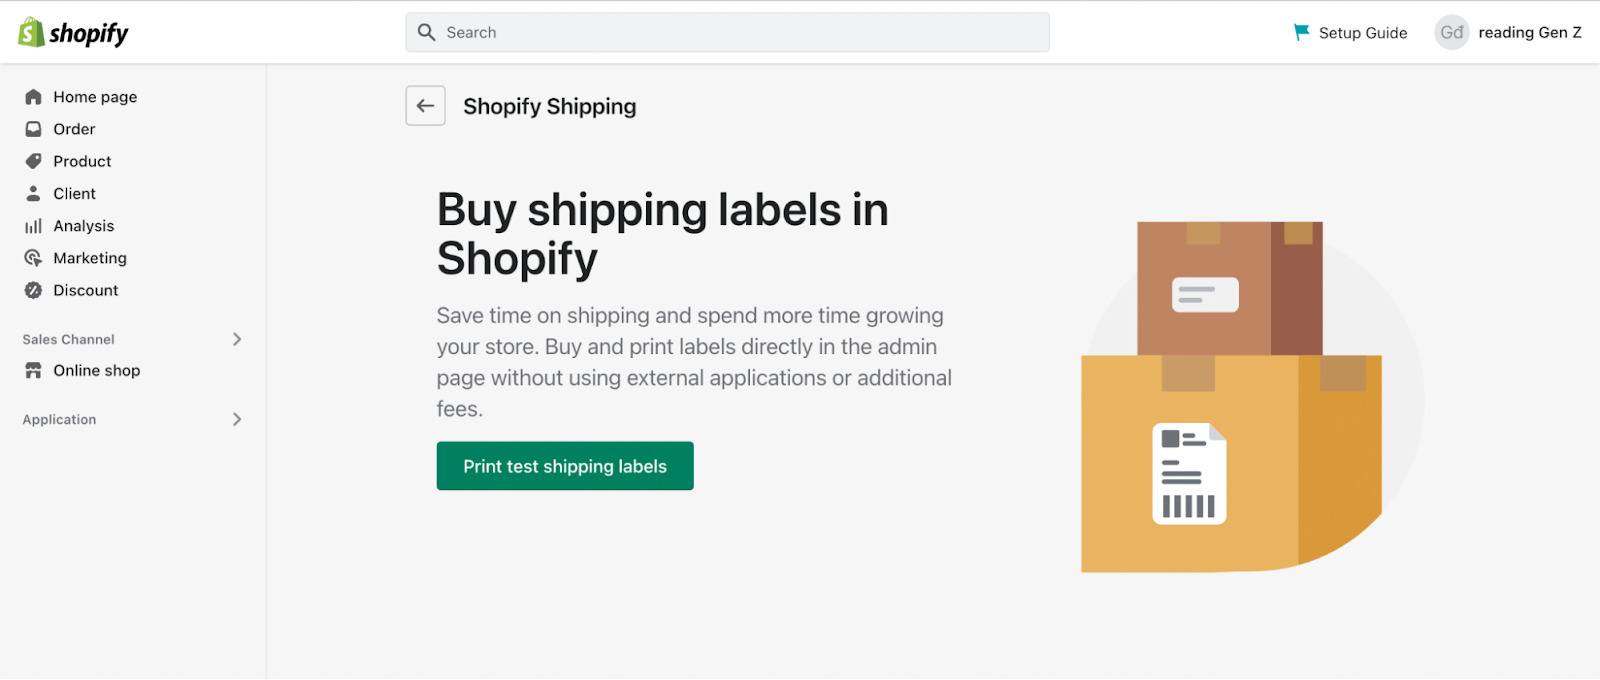 shopify shipping labels 